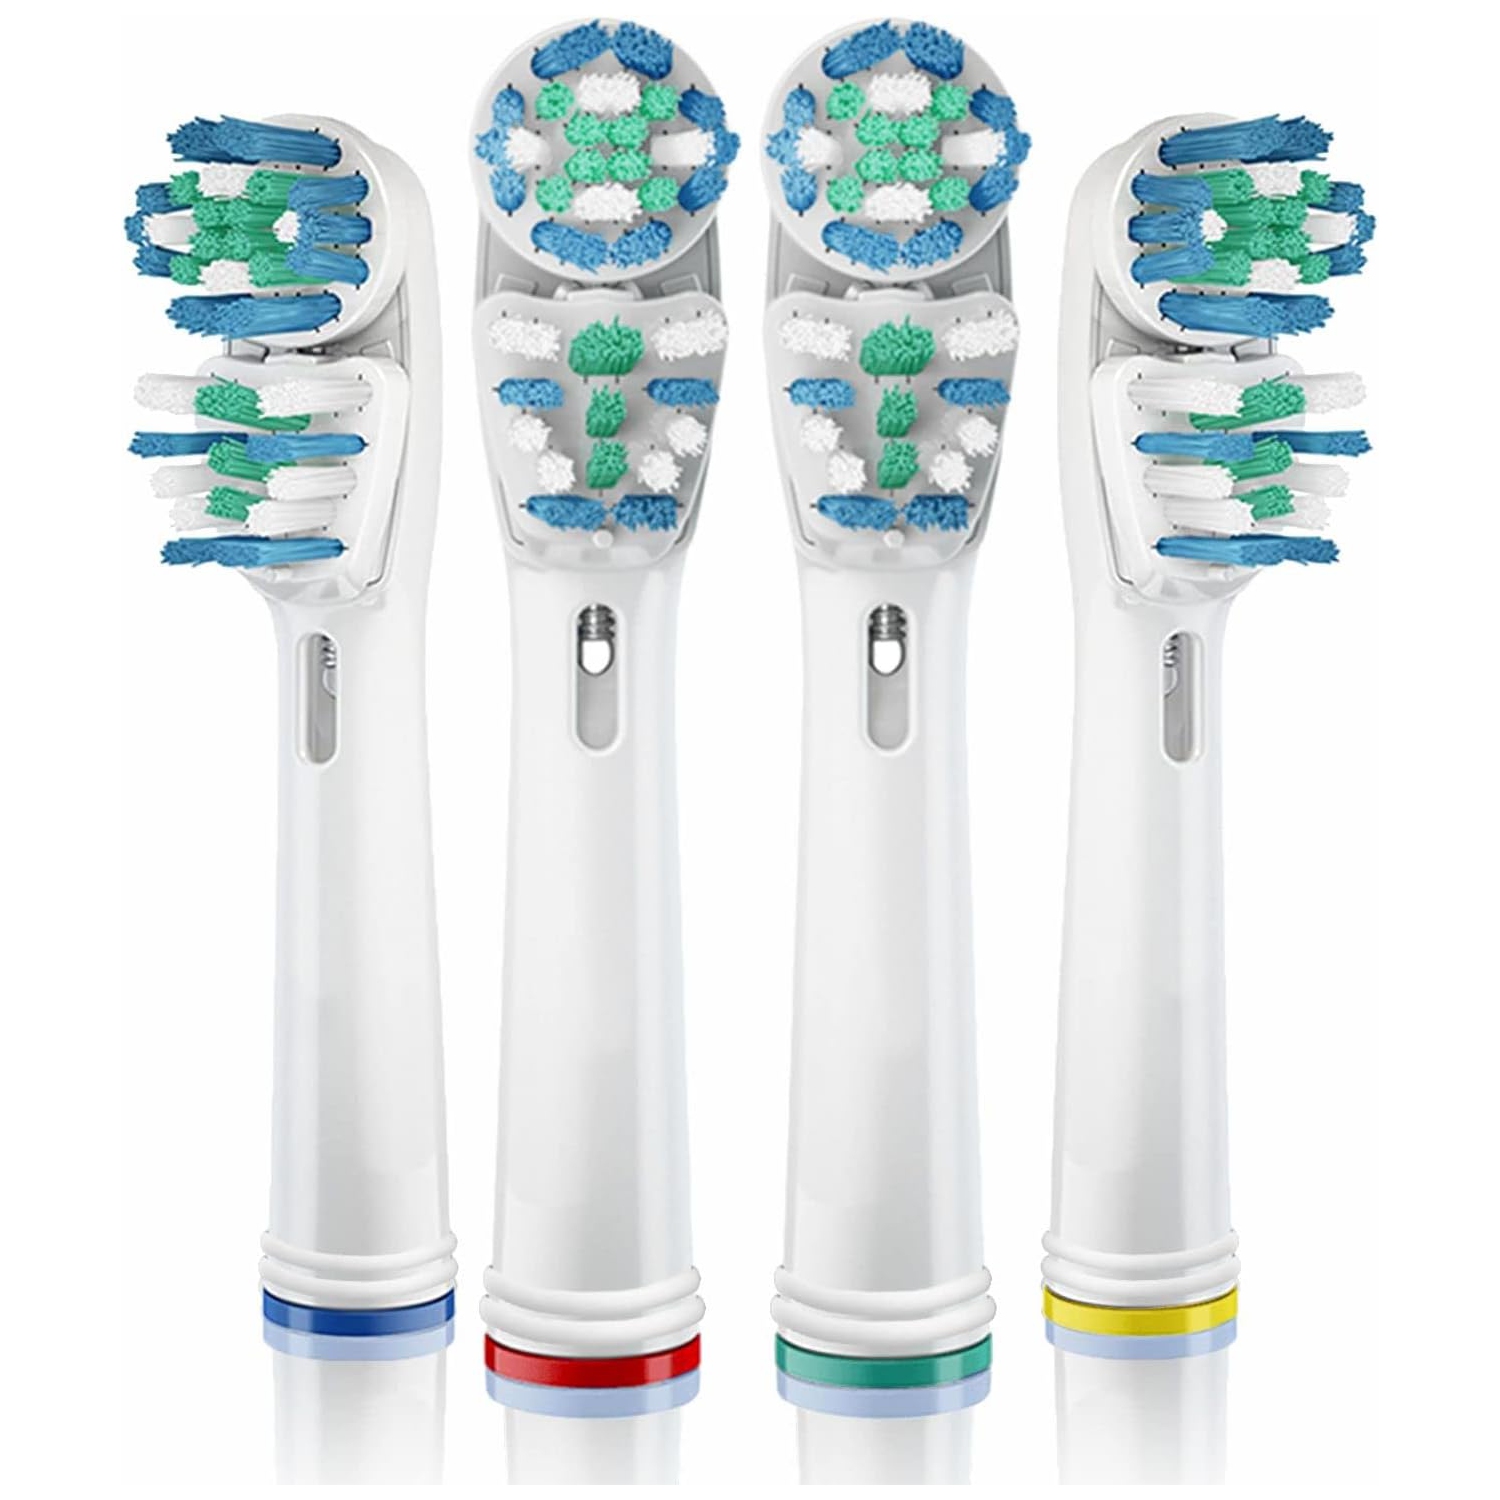 Arable 4 Pcs Toothbrush Heads For Oral B Electric Toothbrushes, Dual Clean Oral B Toothbrush Heads Compatible With Braun Oral B Replacement Heads Vitality Floss Action